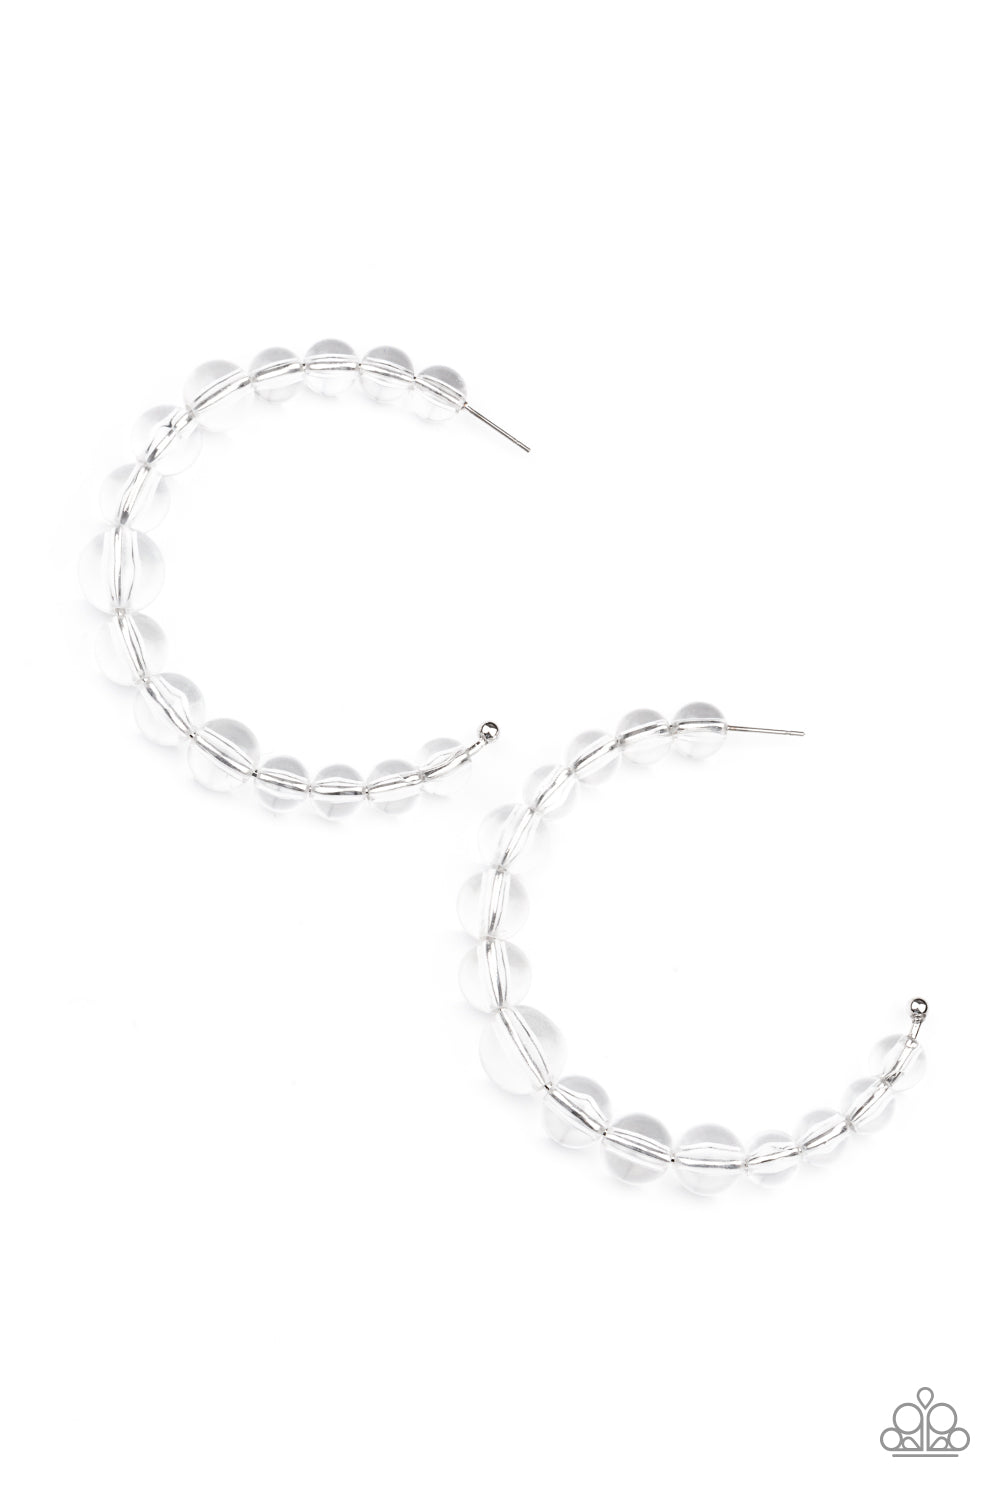 In The Clear White Hoop Earring - Paparazzi Accessories  Gradually increasing in size at the center, a glassy collection of white beads are threaded along an oversized hoop for a bubbly effect. Earring attaches to a standard post fitting. Hoop measure approximately 2 1/2" in diameter.  All Paparazzi Accessories are lead free and nickel free!  Sold as one pair of hoop earrings.